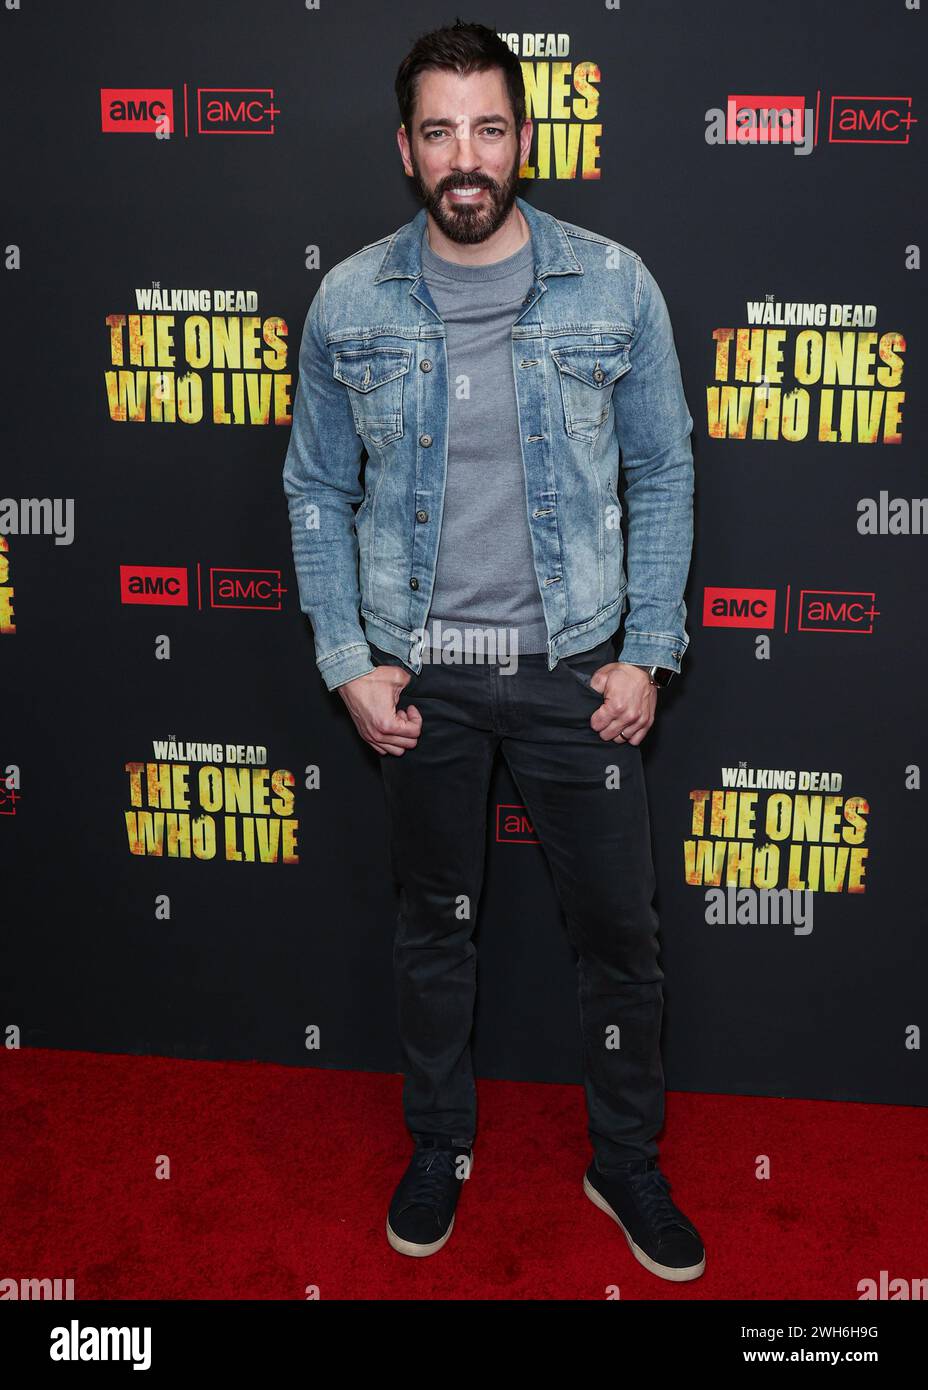 HOLLYWOOD, LOS ANGELES, KALIFORNIEN, USA - FEBRUAR 07: Drew Scott kommt zur Los Angeles Premiere von AMC+'s The Walking Dead: the Ones Who Live' Staffel 1 fand am 7. Februar 2024 im Linwood Dunn Theater im Pickford Center for Motion Picture Study in Hollywood, Los Angeles, Kalifornien, USA statt. (Foto: Xavier Collin/Image Press Agency) Stockfoto